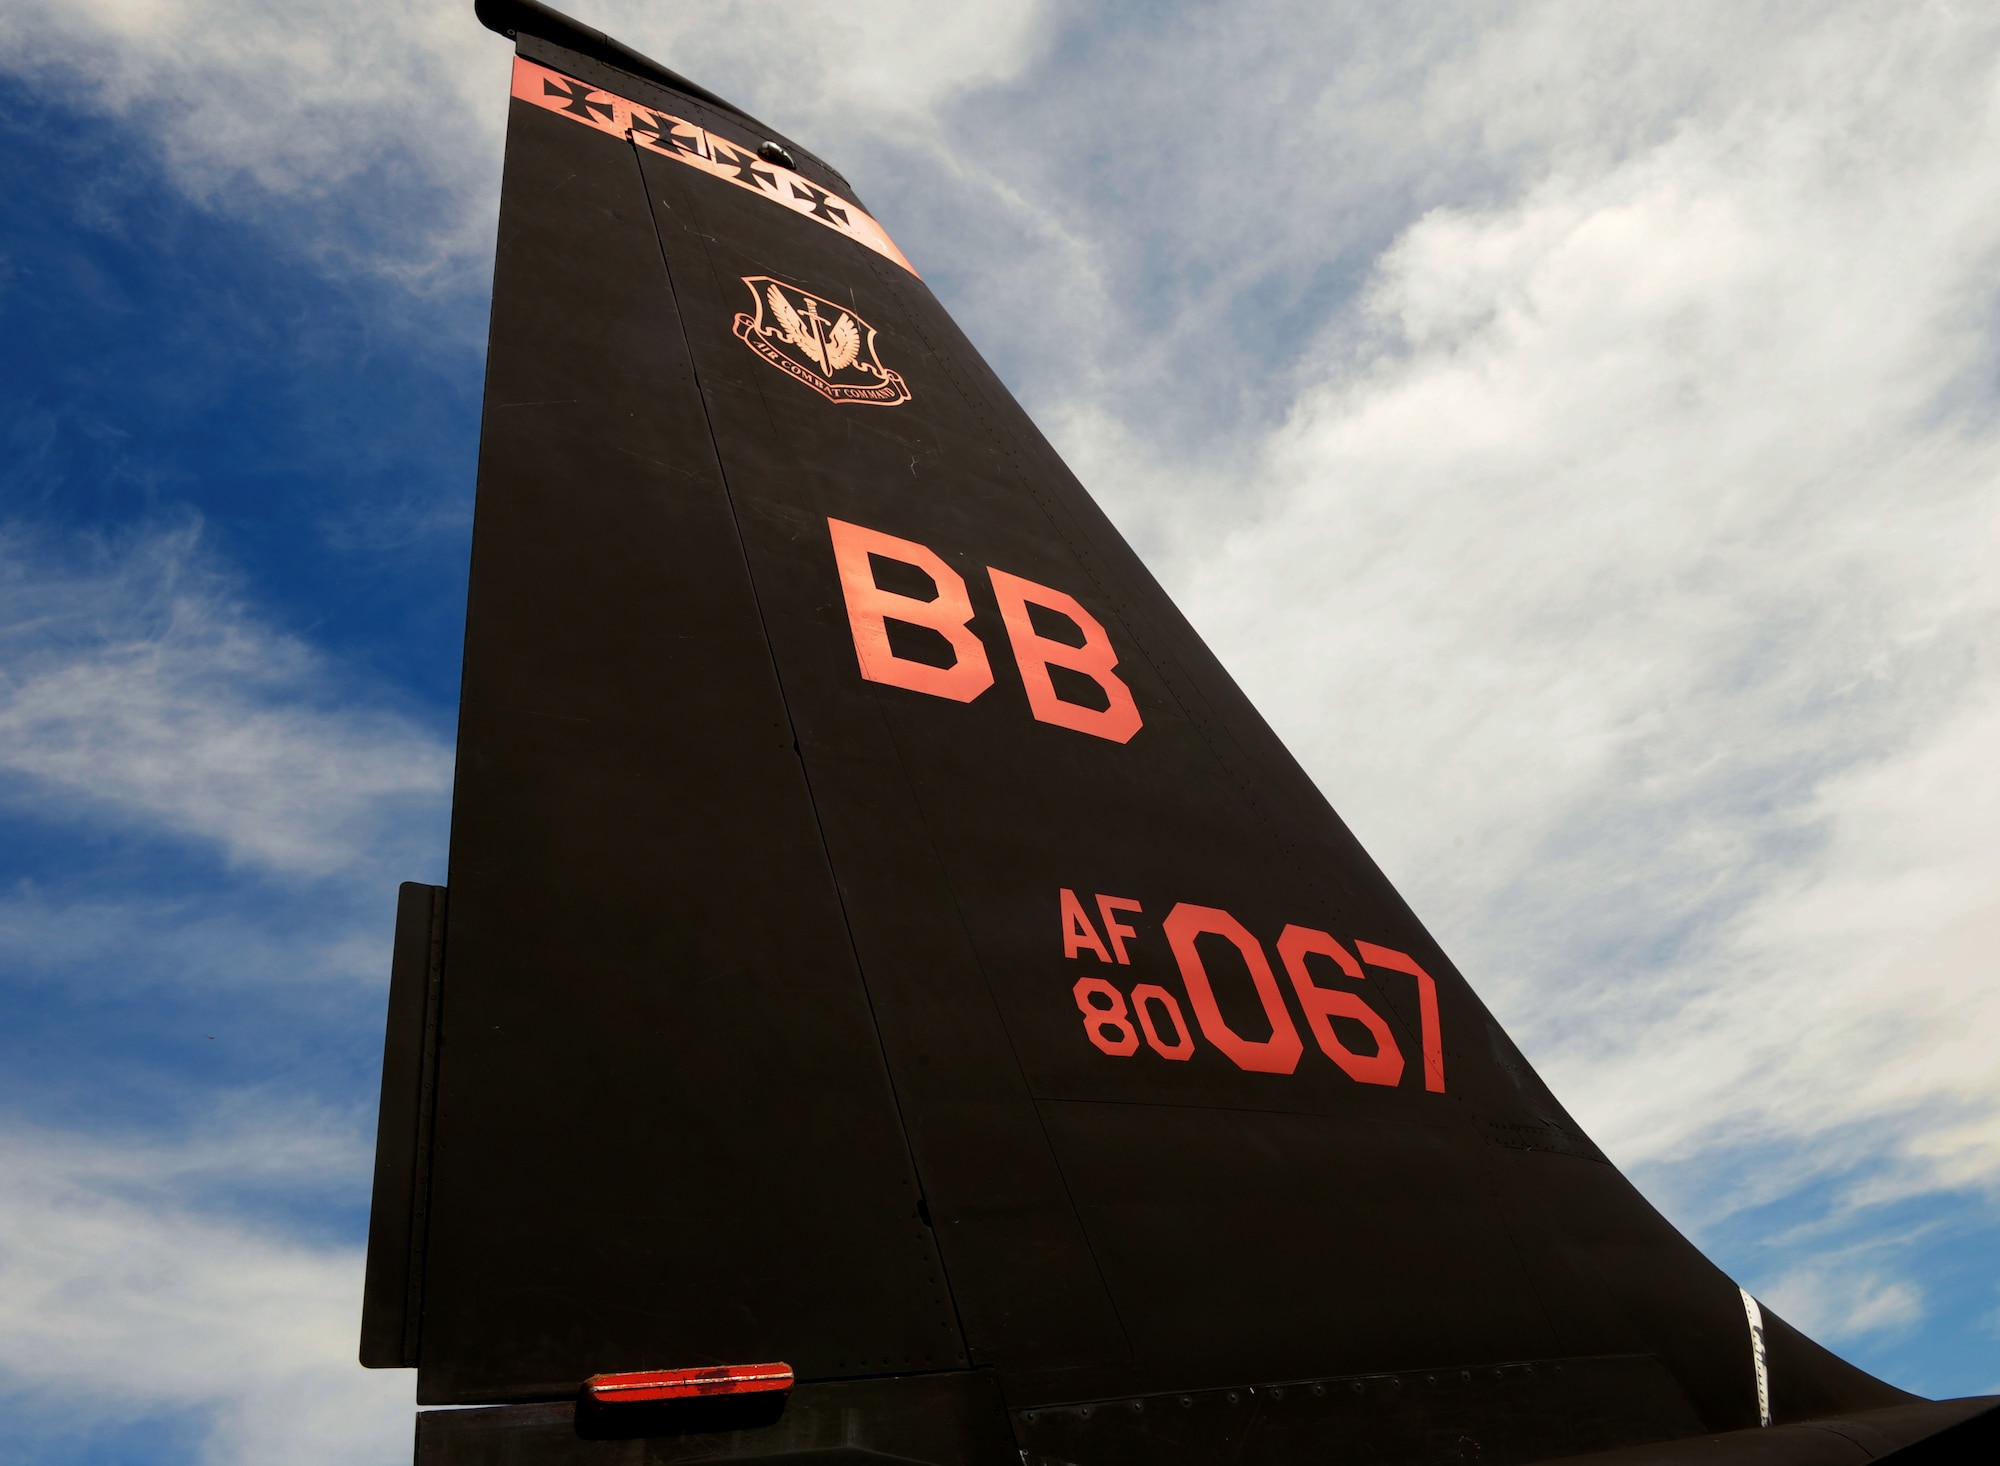 A U-2 Dragon Lady is showcased for attaining a rare achievement at Beale Air Force Base, California, July 14, 2015. The aircraft was recognized as a “black-letter jet,” an accomplishment in which a plane flies with zero discrepancies. The achievement has not happened in 13 years at Beale. (U.S. Air Force photo by Airman Preston L. Cherry)